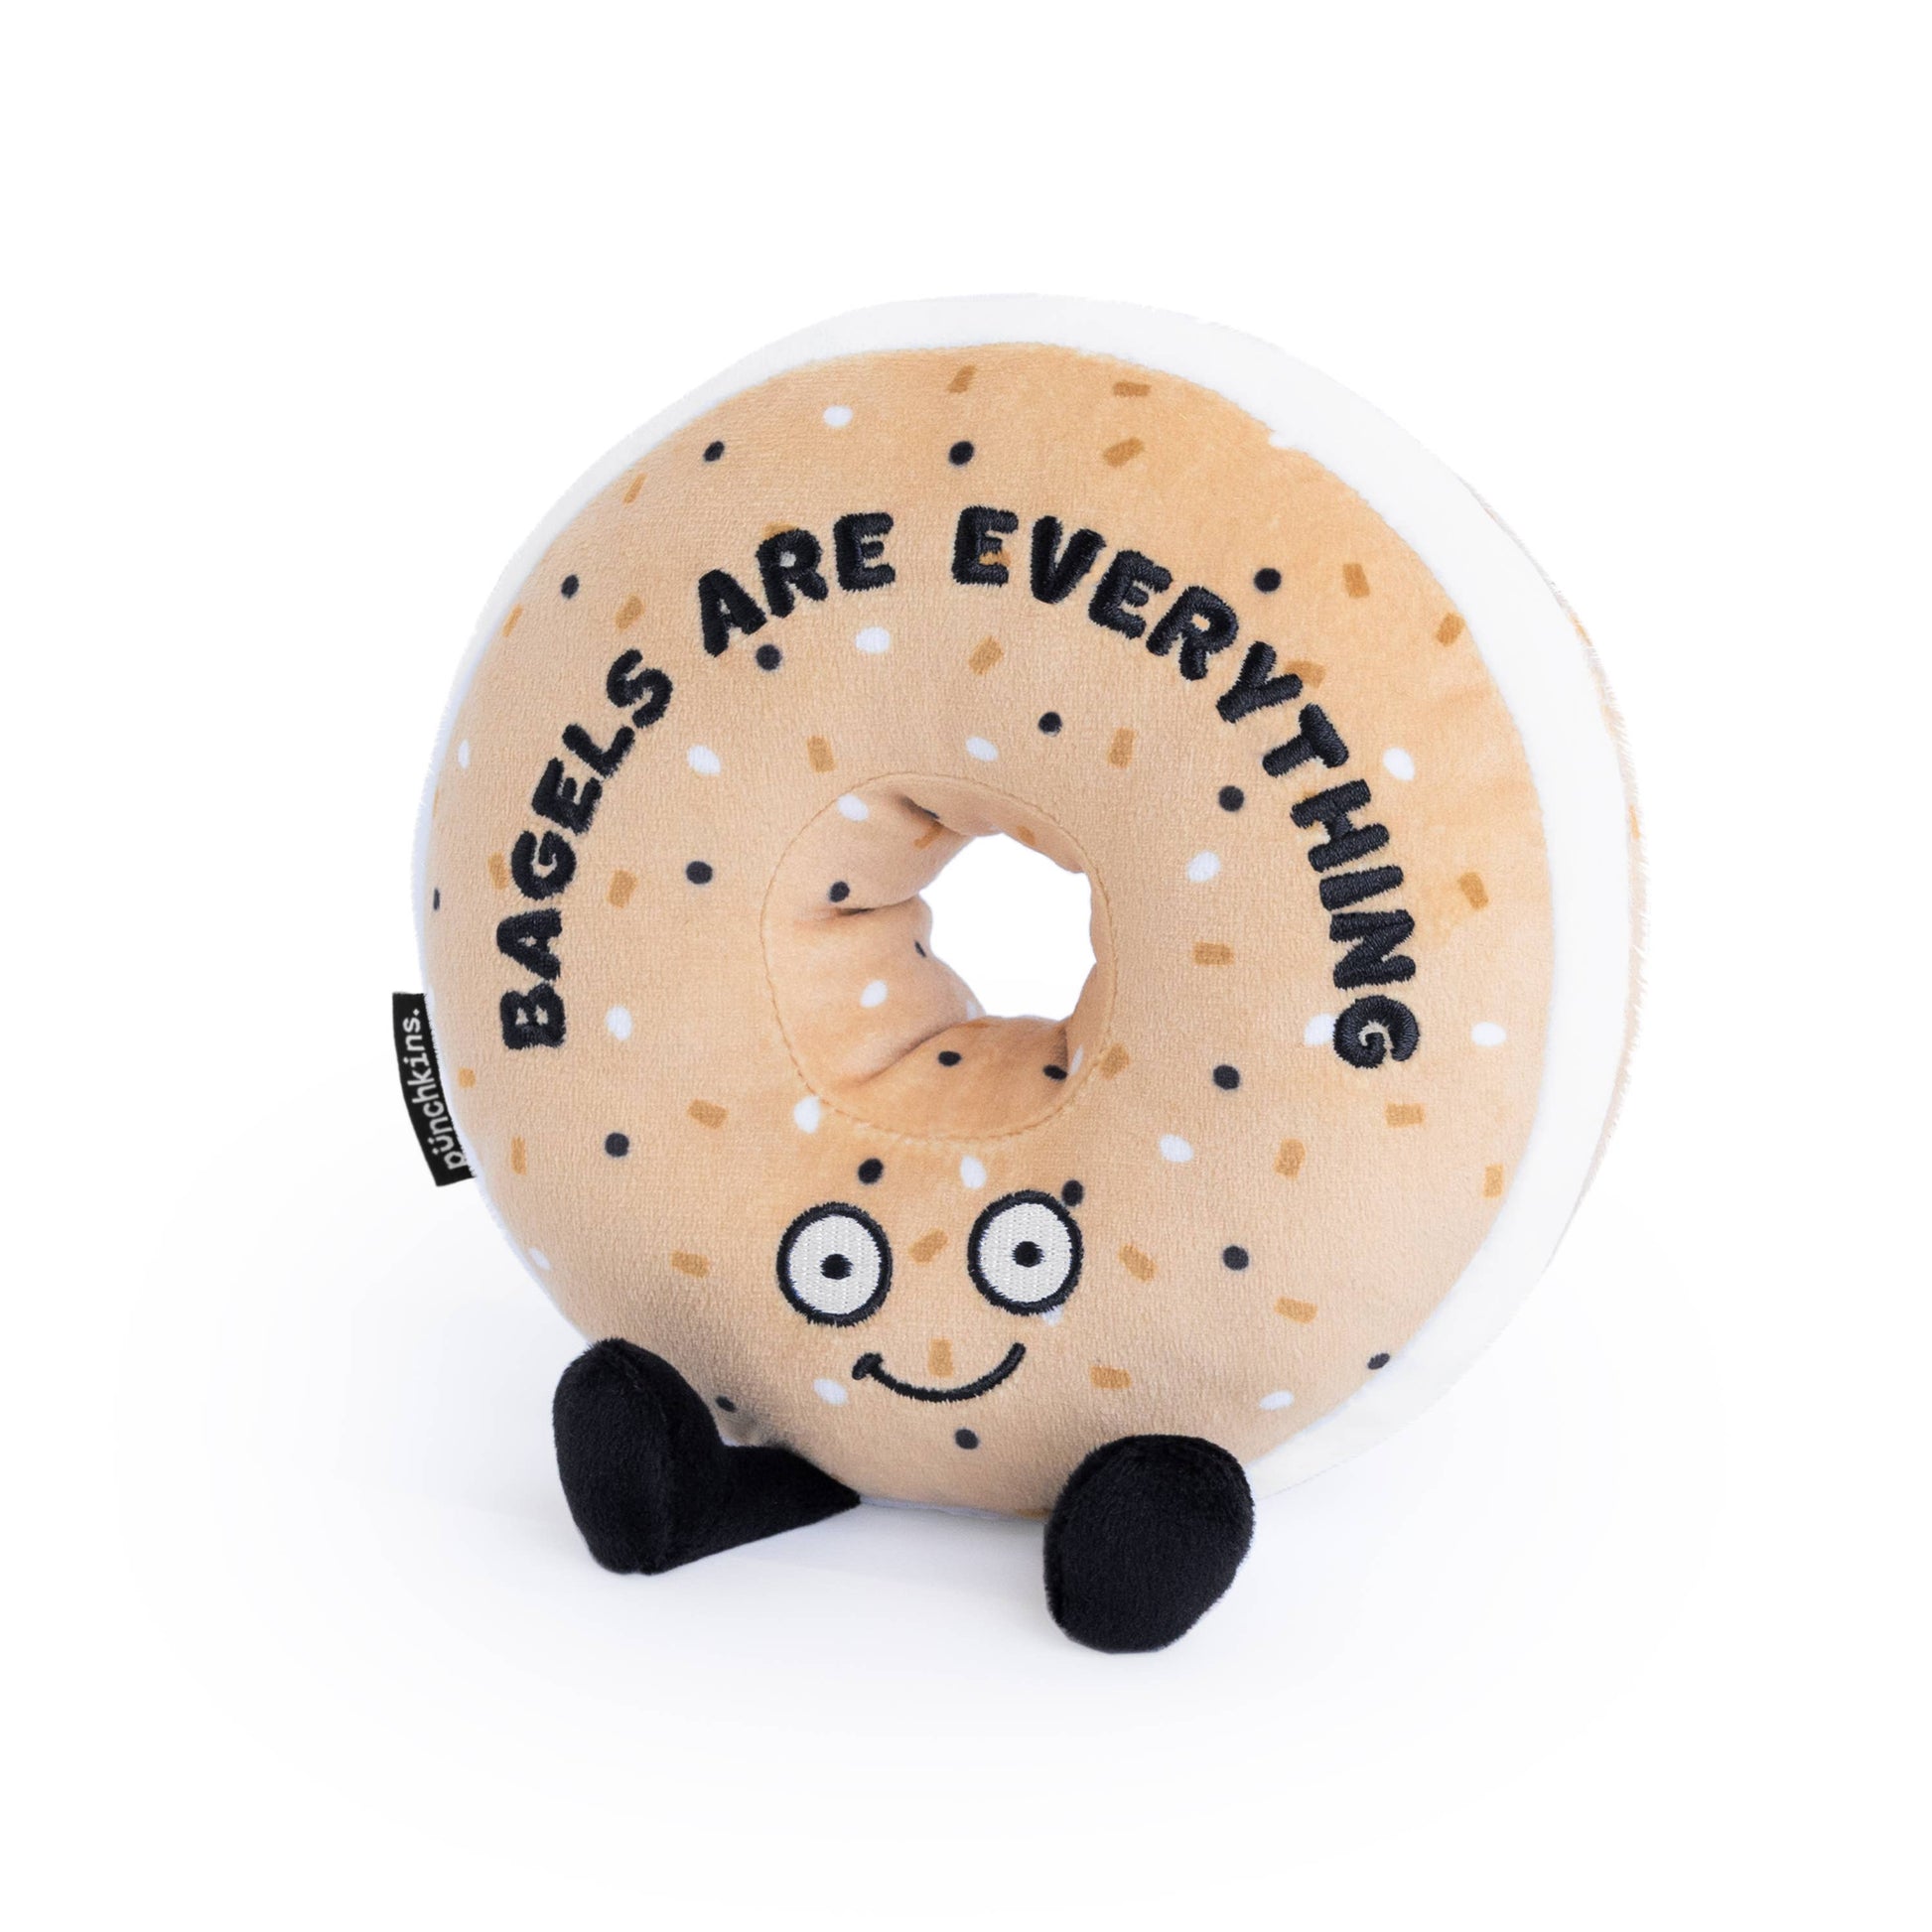 Everything bagel plush toy that reads "bagels are everything" 